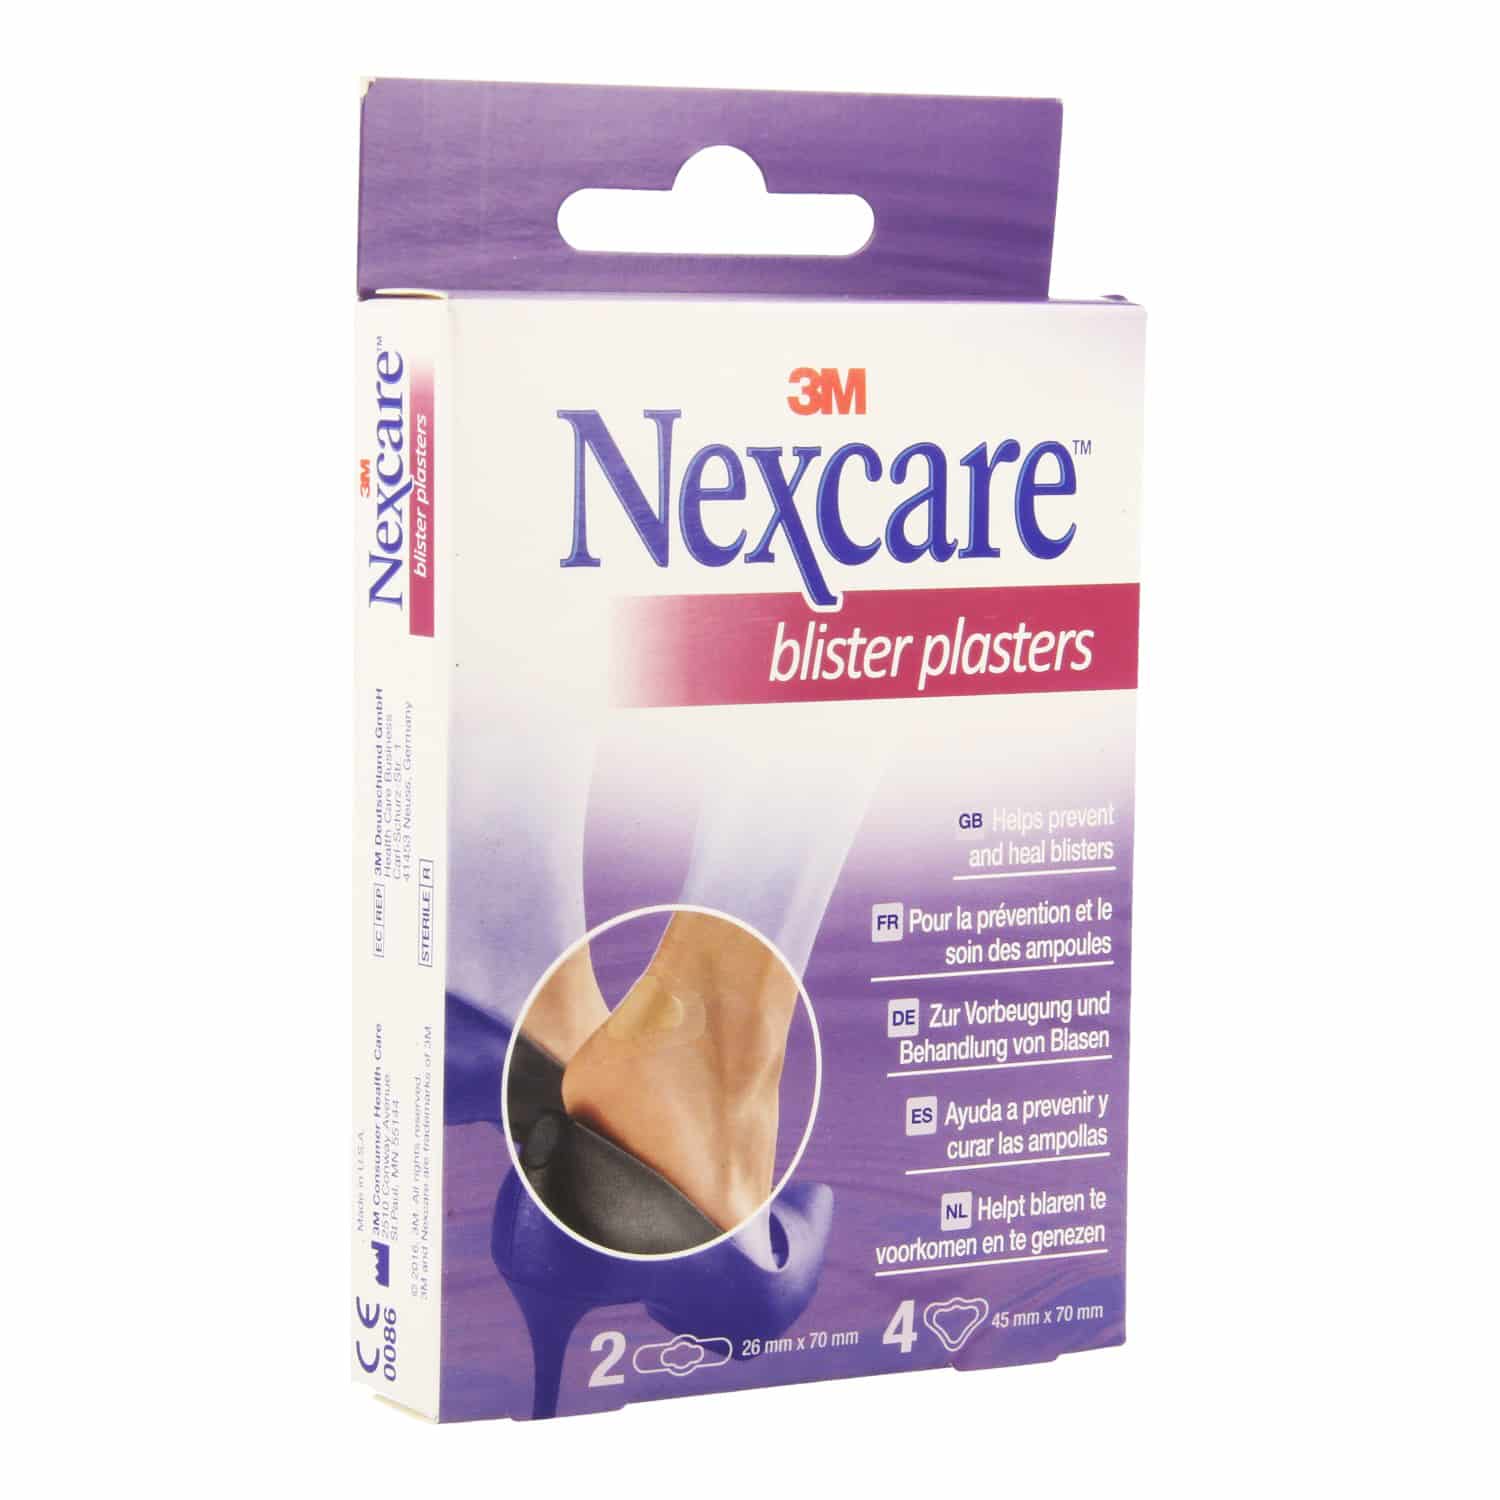 Nexcare Blister Plasters